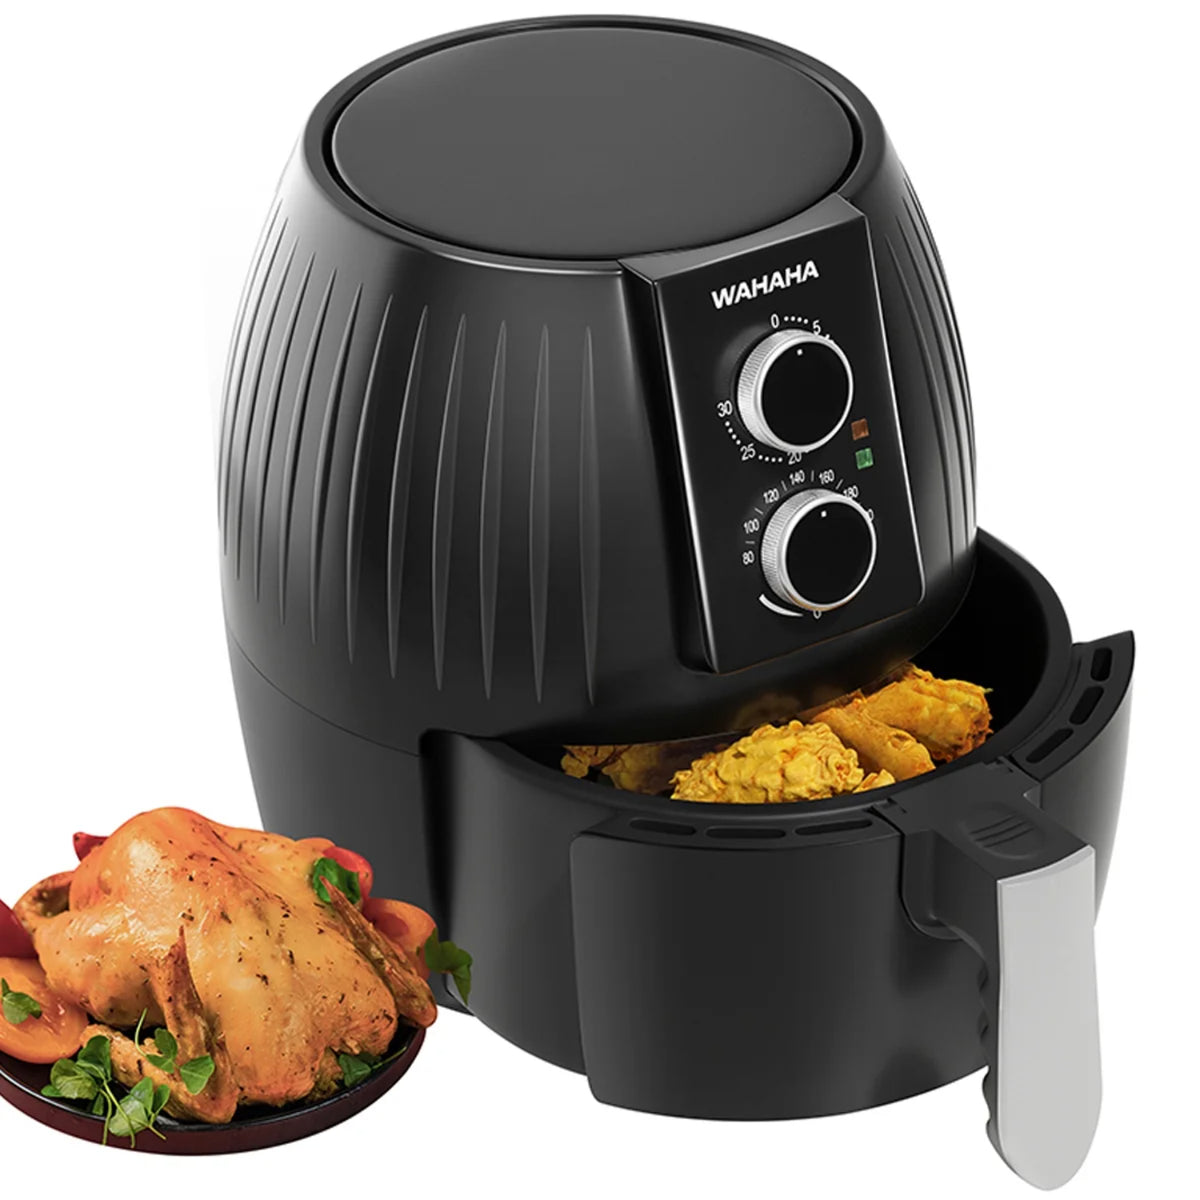 LNC 33.8 qt. Black and Silver Stainless Steel Air Fryer Oven with Baking Tray Fry Basket Rotisserie Fork Set #EBNRBMHD1000B78